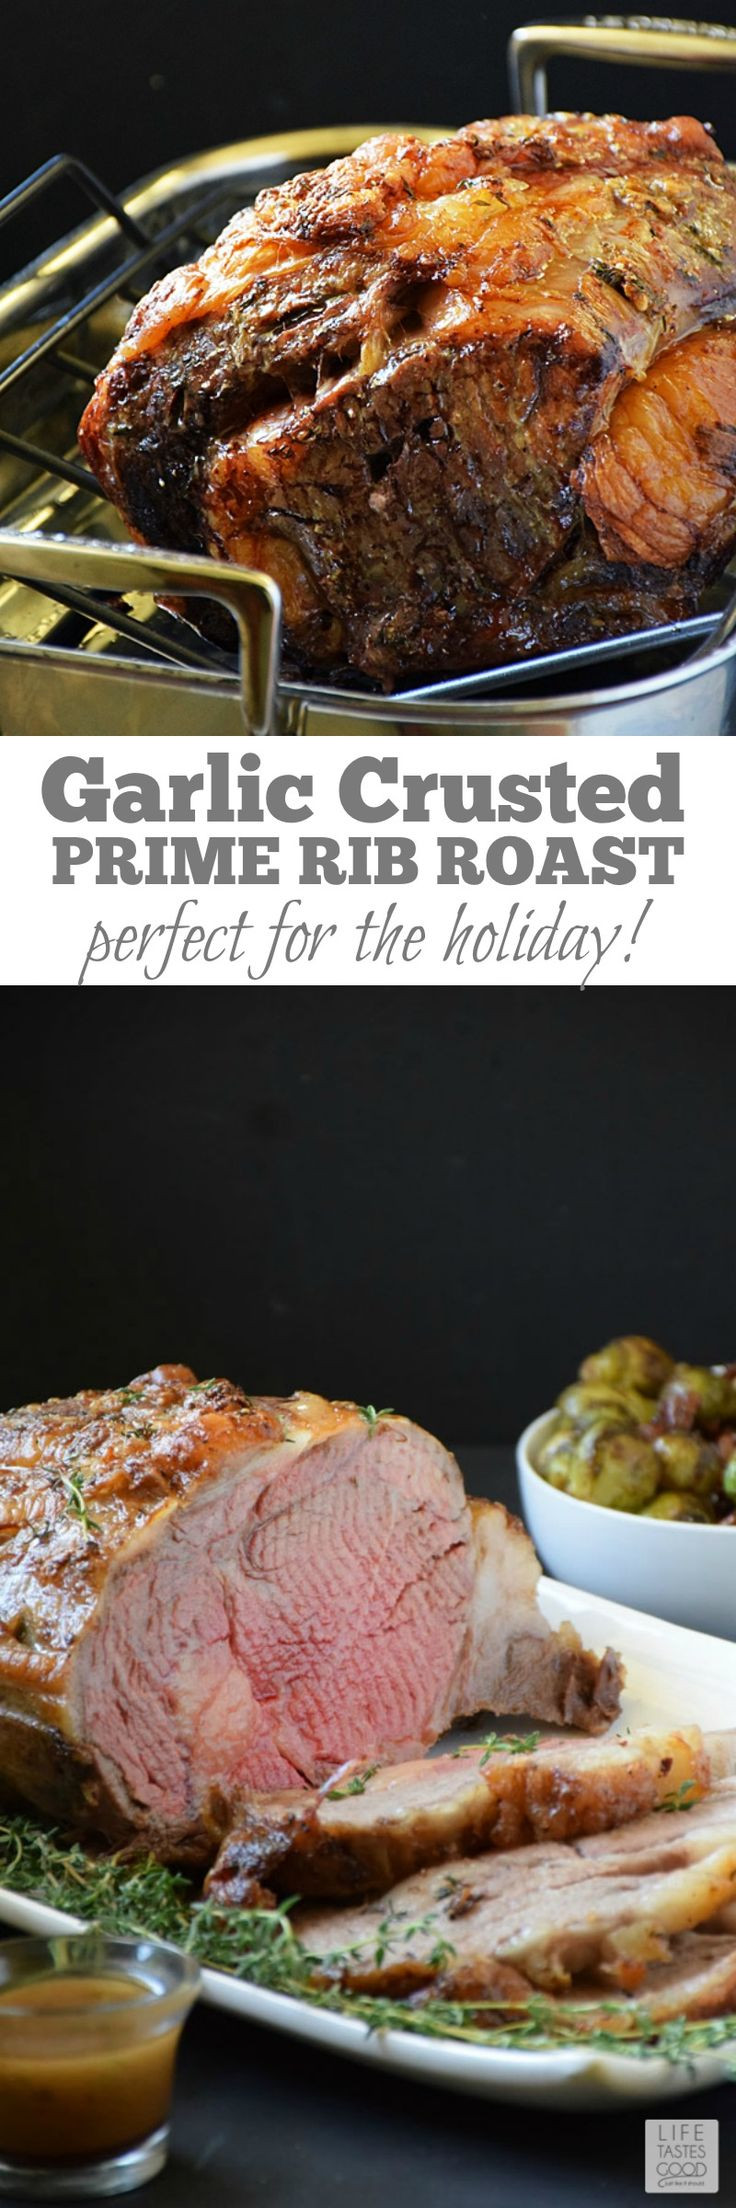 Side Dishes For Prime Rib Christmas
 25 best ideas about Christmas Dinner Menu on Pinterest